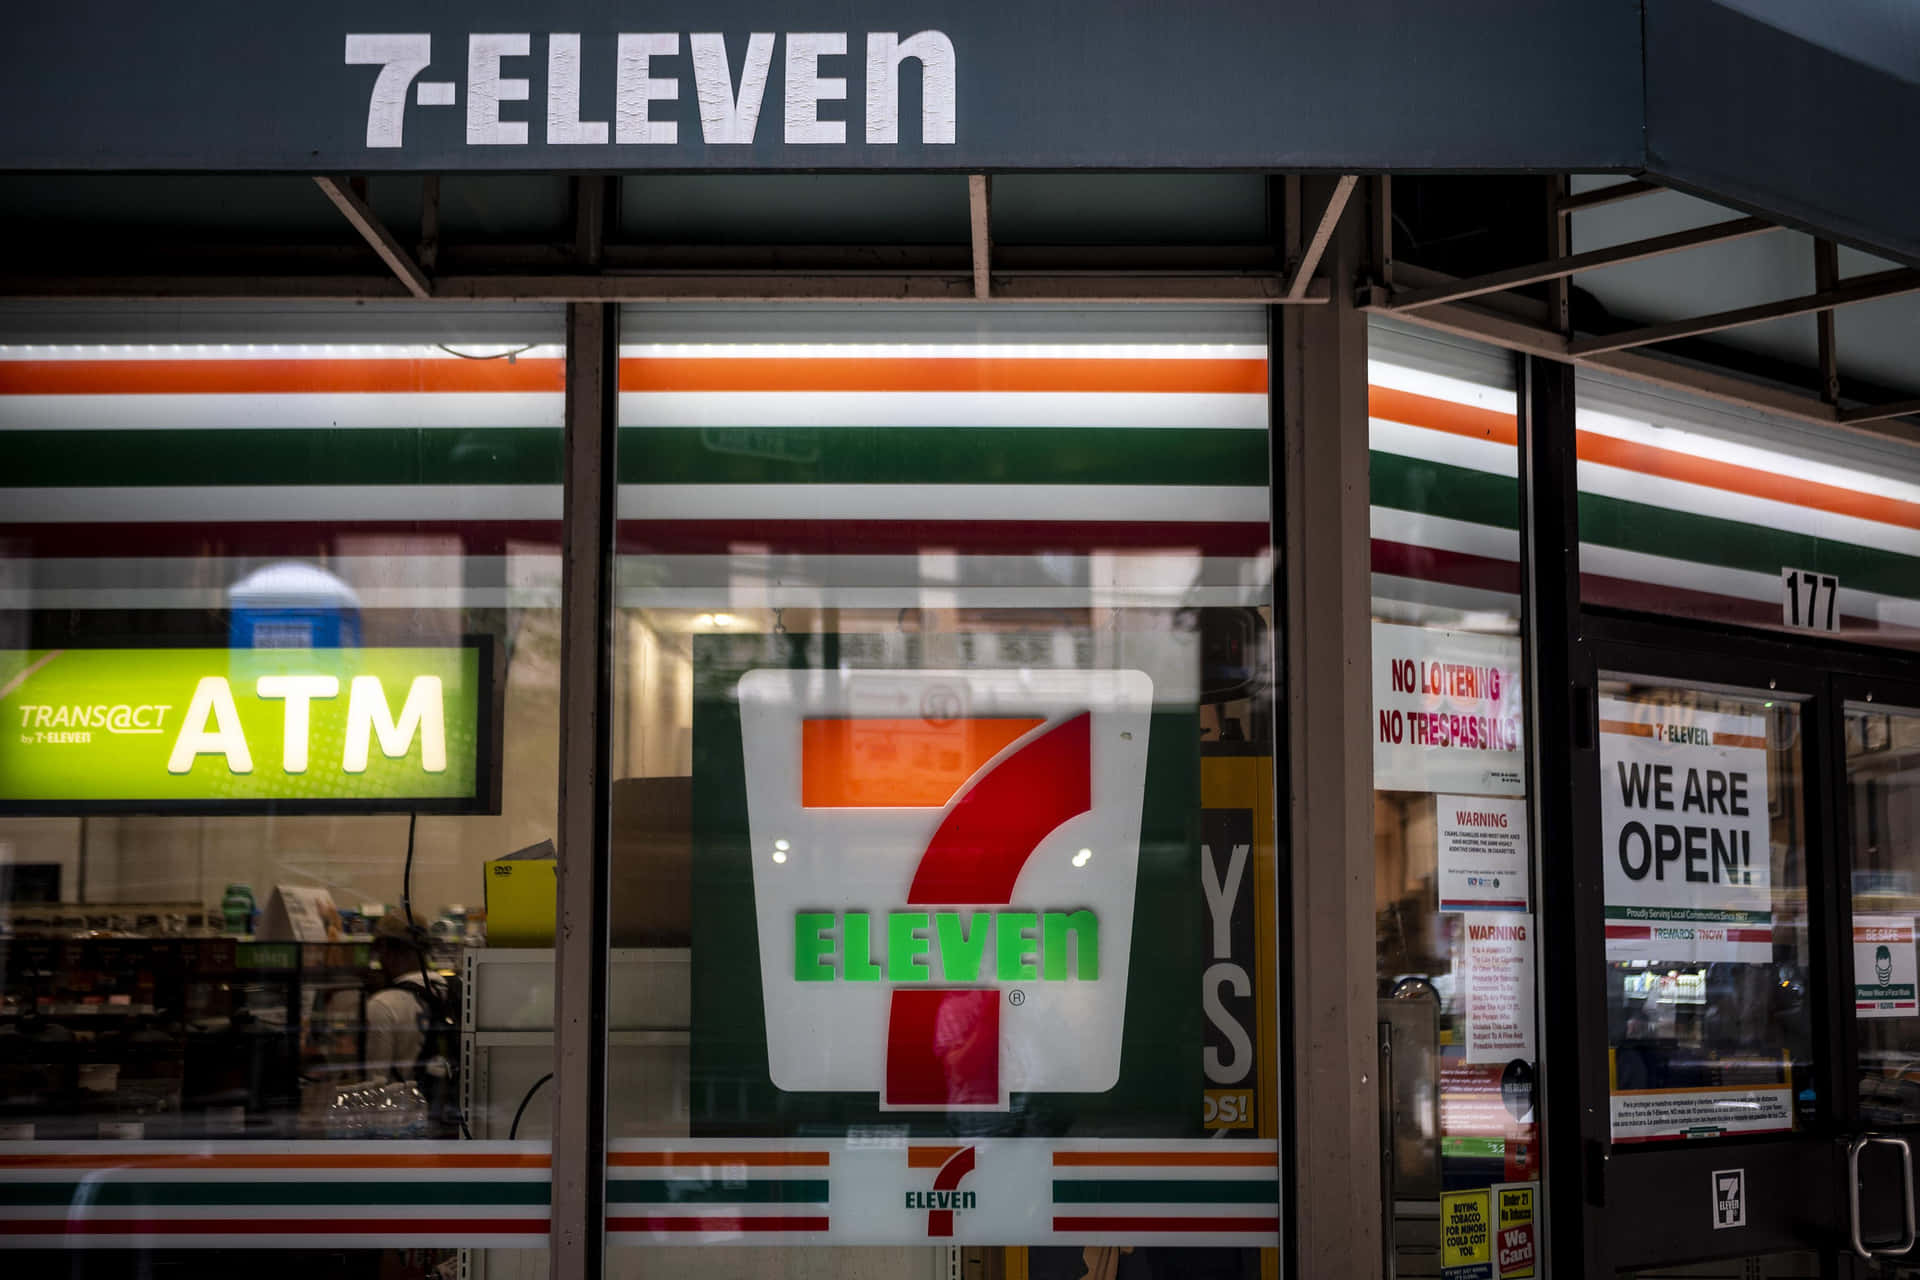 A 7 Eleven Store With A Sign On The Front